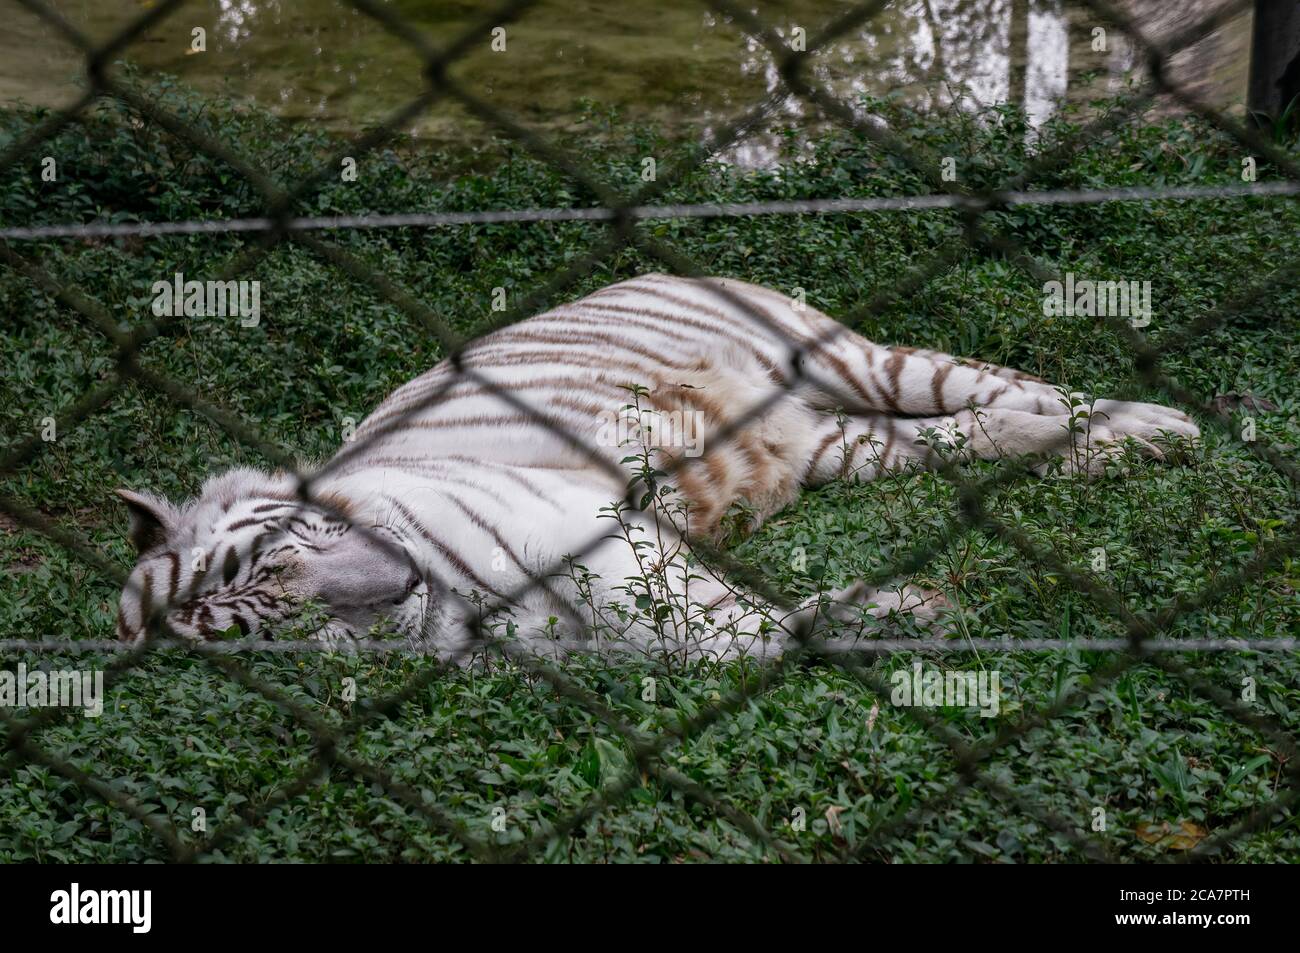 A white Belgal tiger (Panthera tigris tigris - native to the Indian subcontinent) laid down on the grass taking a nap in Zoo Safari zoological park. Stock Photo